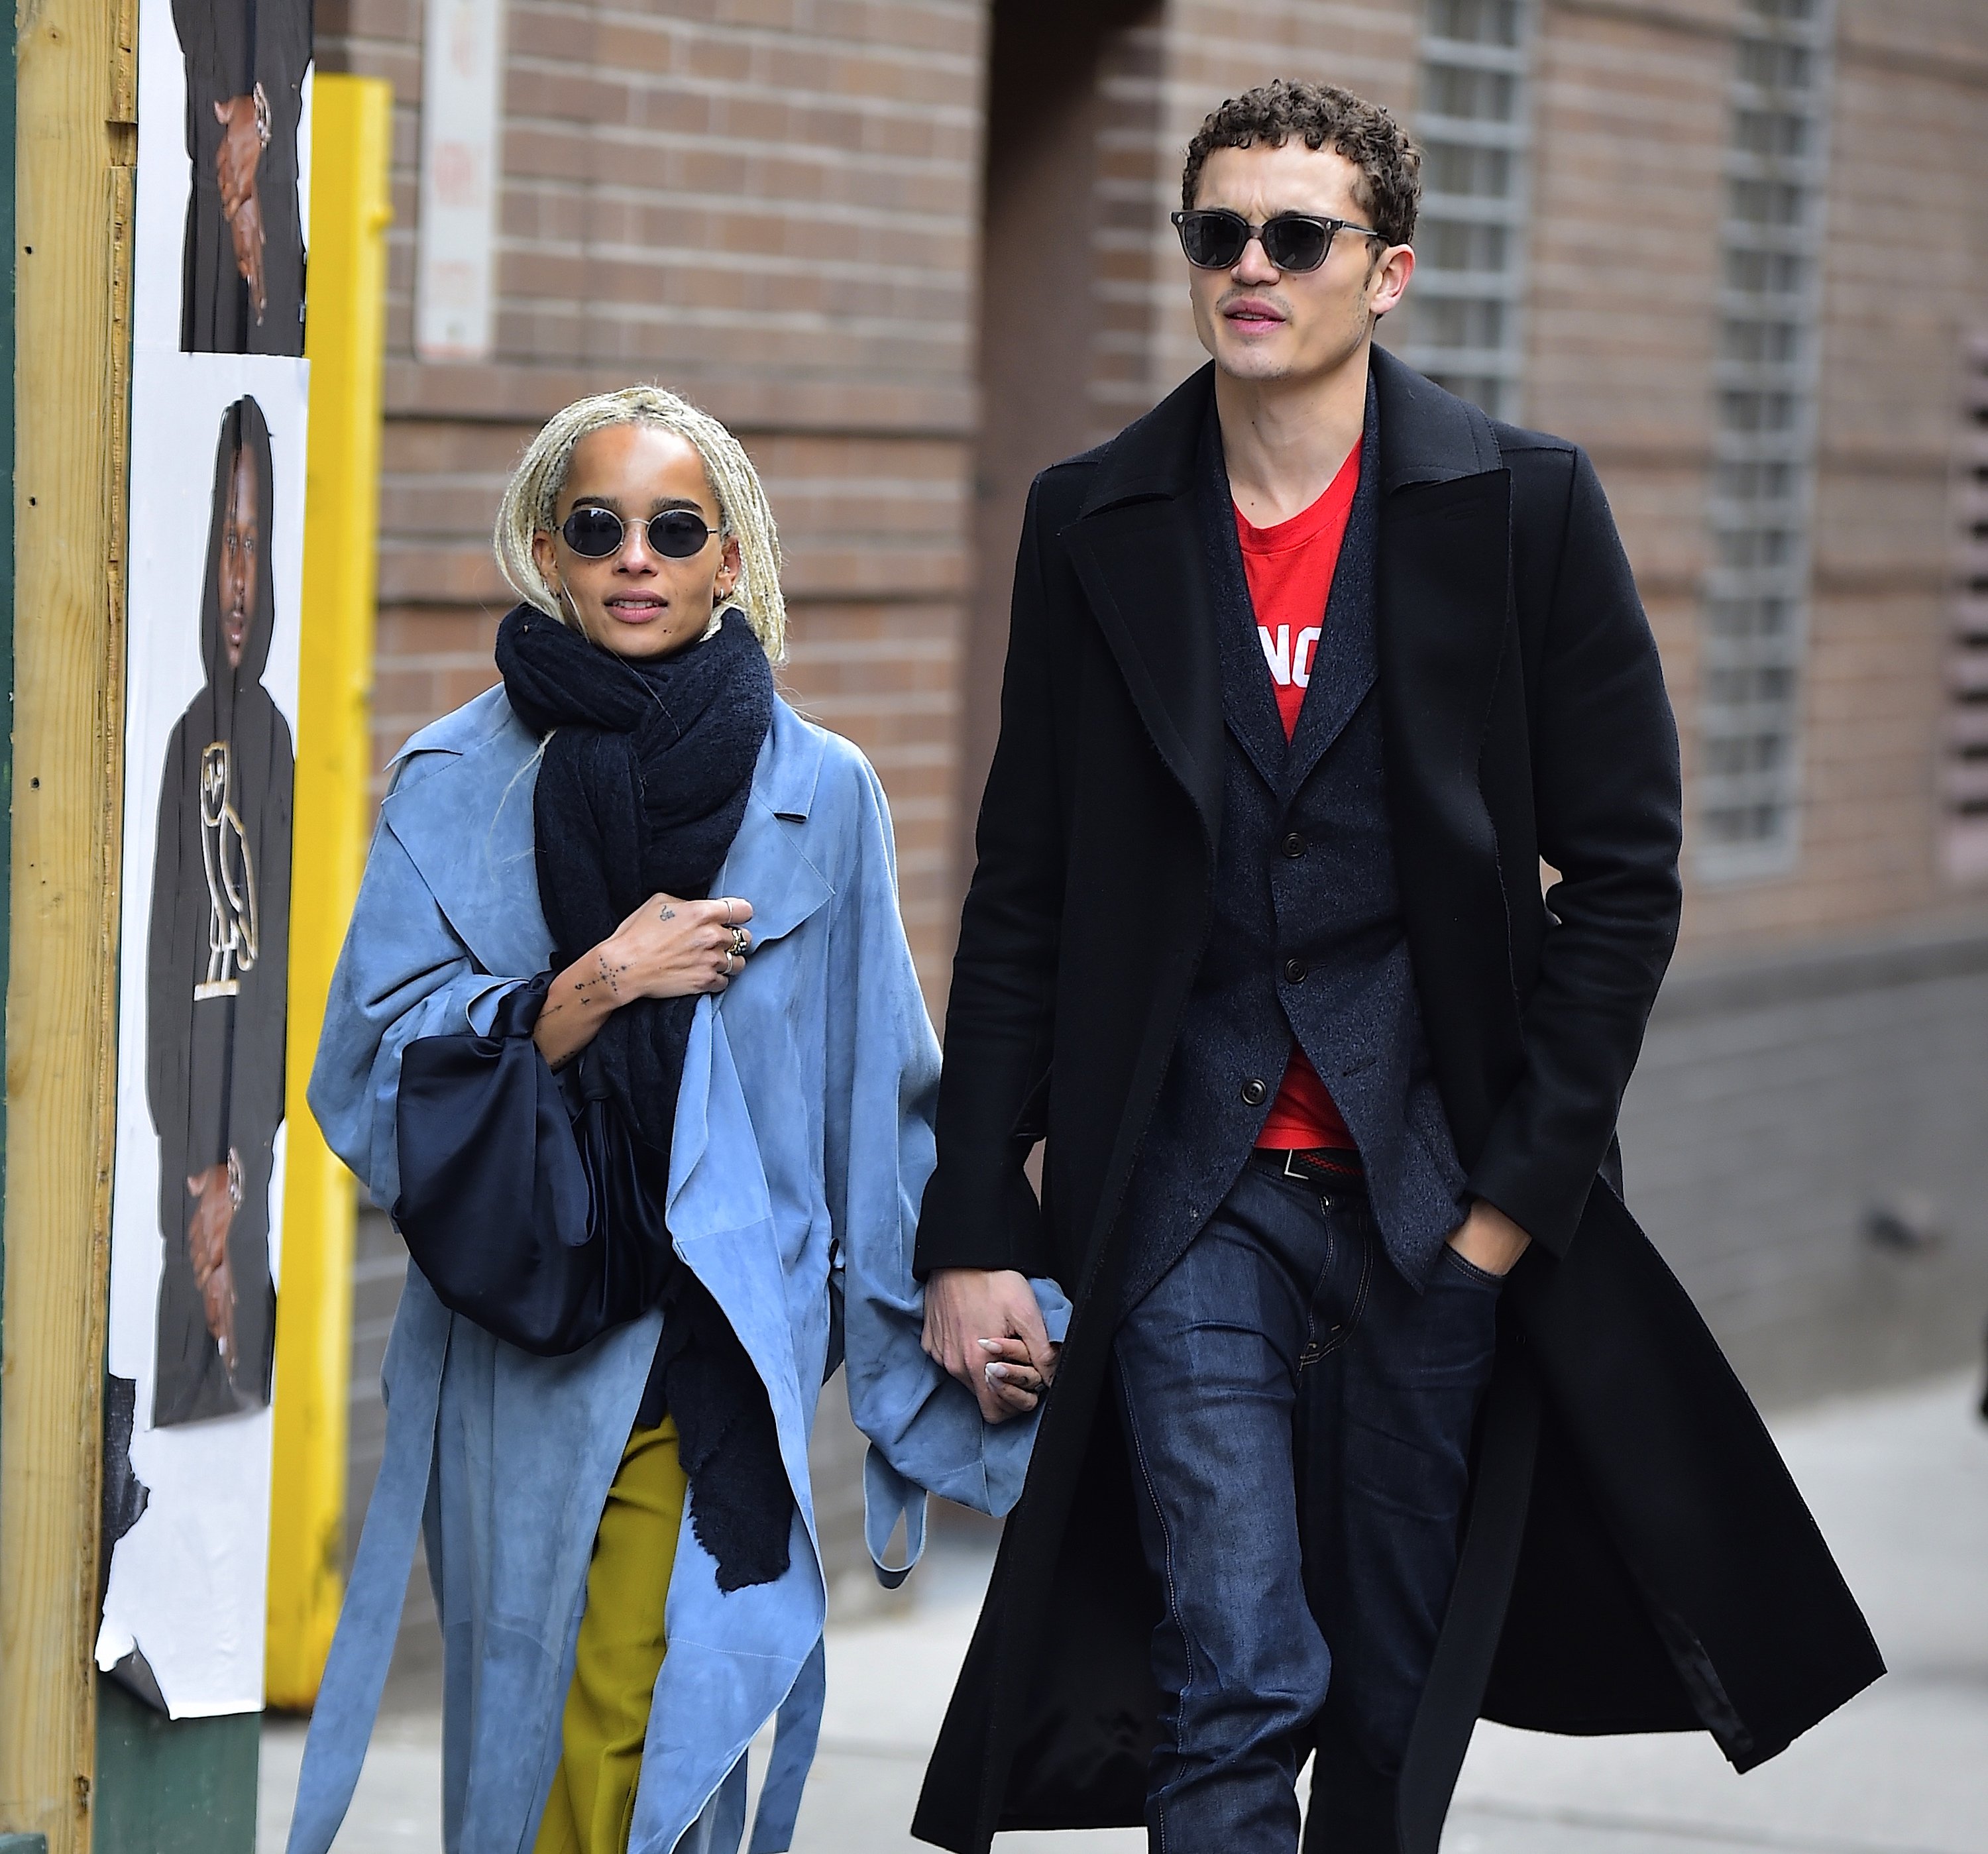 Zoe Kravitz and Karl Glusman are seen in Soho on February 2, 2017, in New York City. | Source: Getty Images